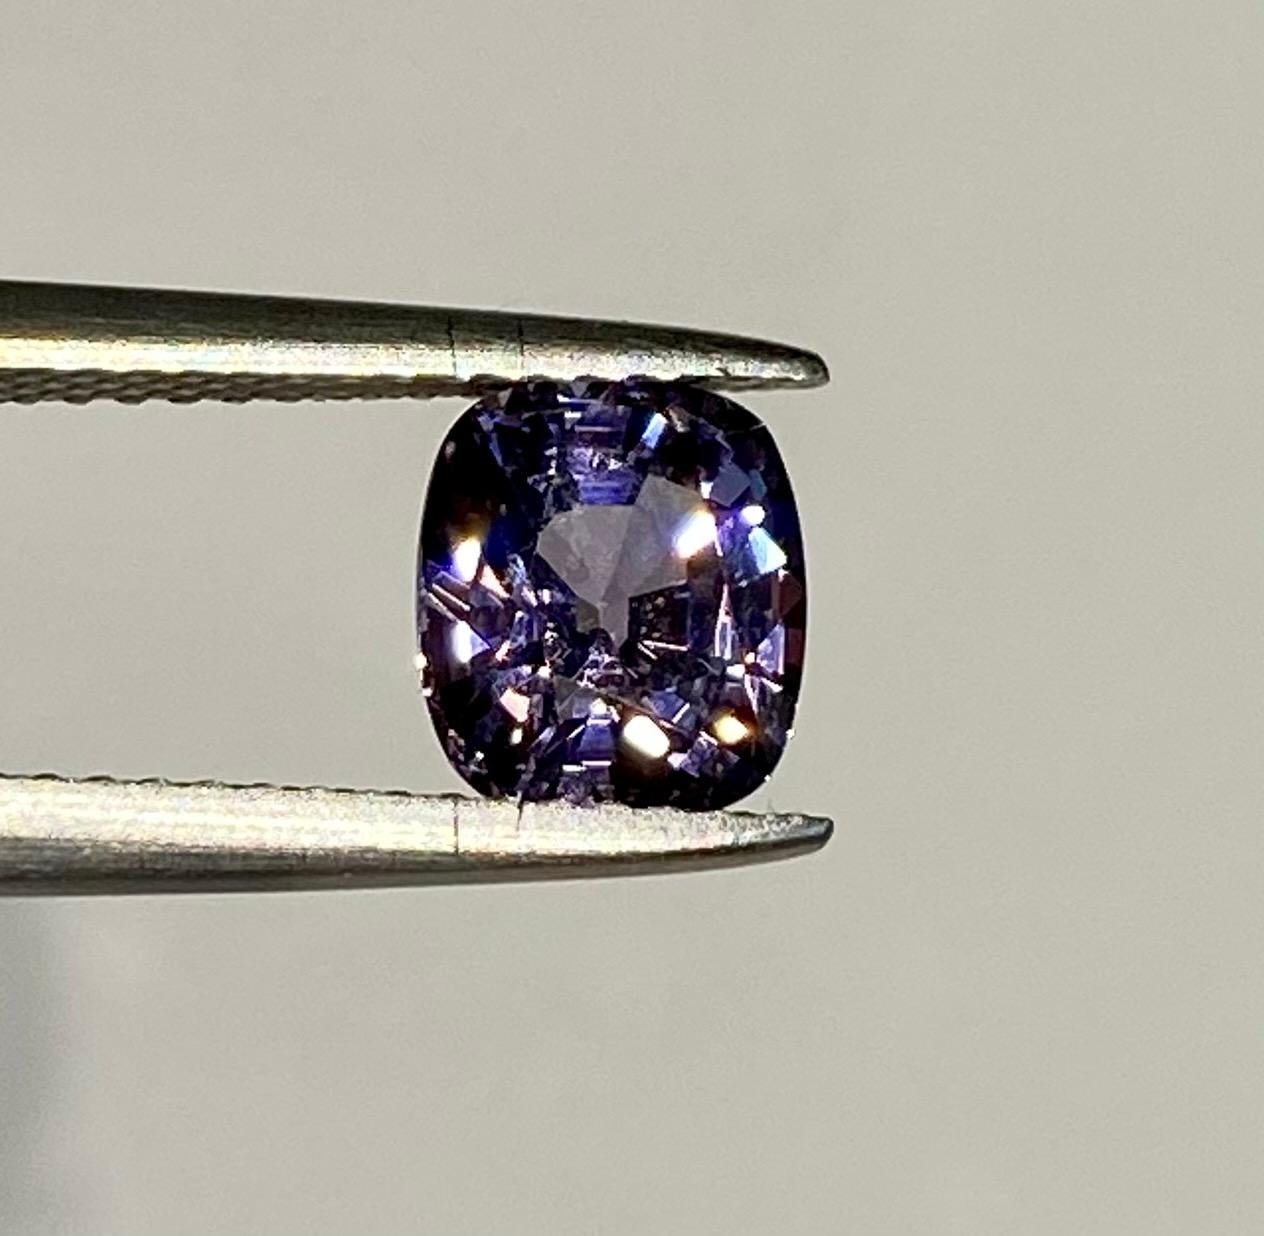 A Burmese Purple Spinel of 1.73 Carats is a lovely Cushion Cut. This is a completely natural Spinel having undergone no artificial treatments or enhancements.

Originally from San Diego, California, Kary Adam lived in the “Gem Capital of the World”